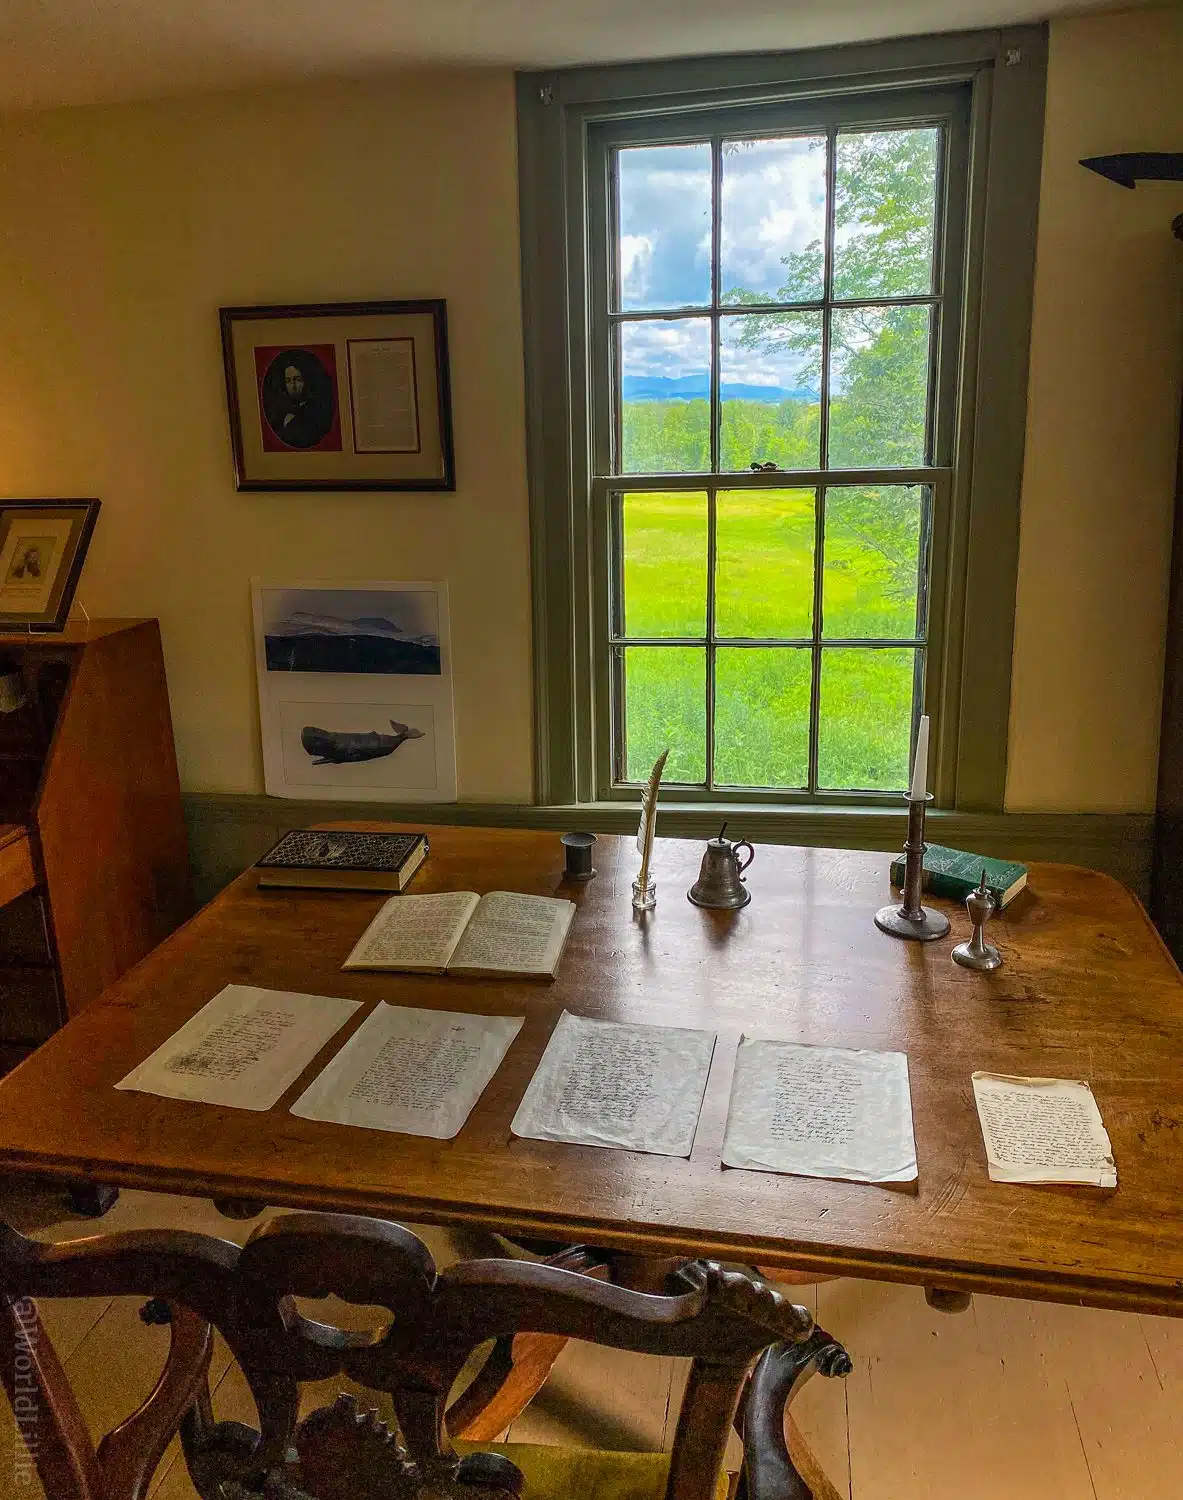 Herman Melville's desk where he wrote Moby Dick!